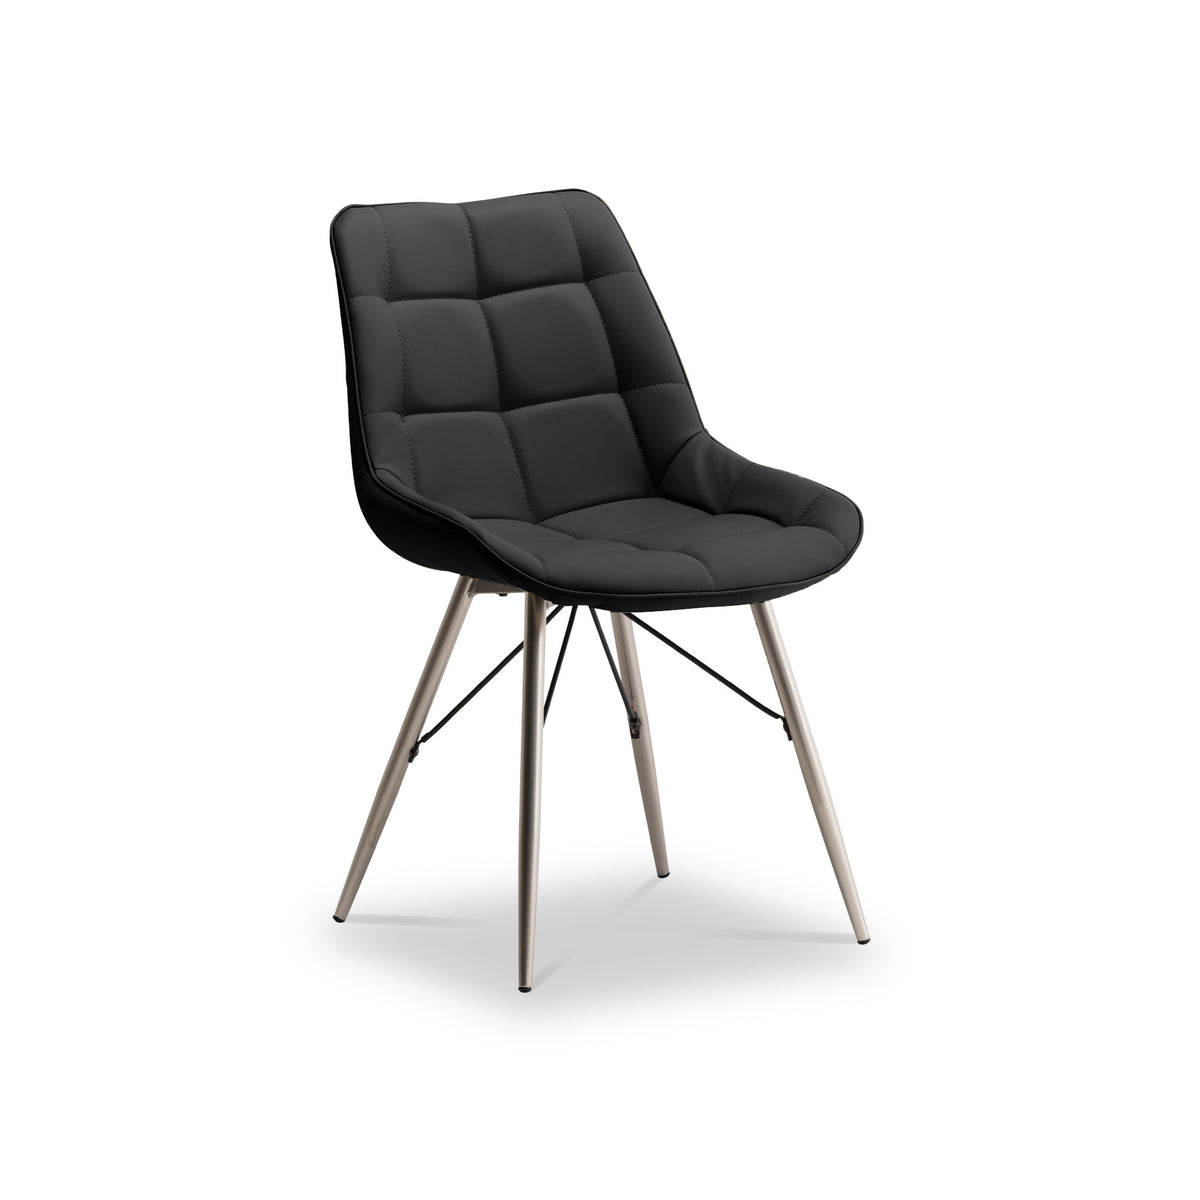 Ana Black Faux Leather Dining Chair by Roseland Furniture